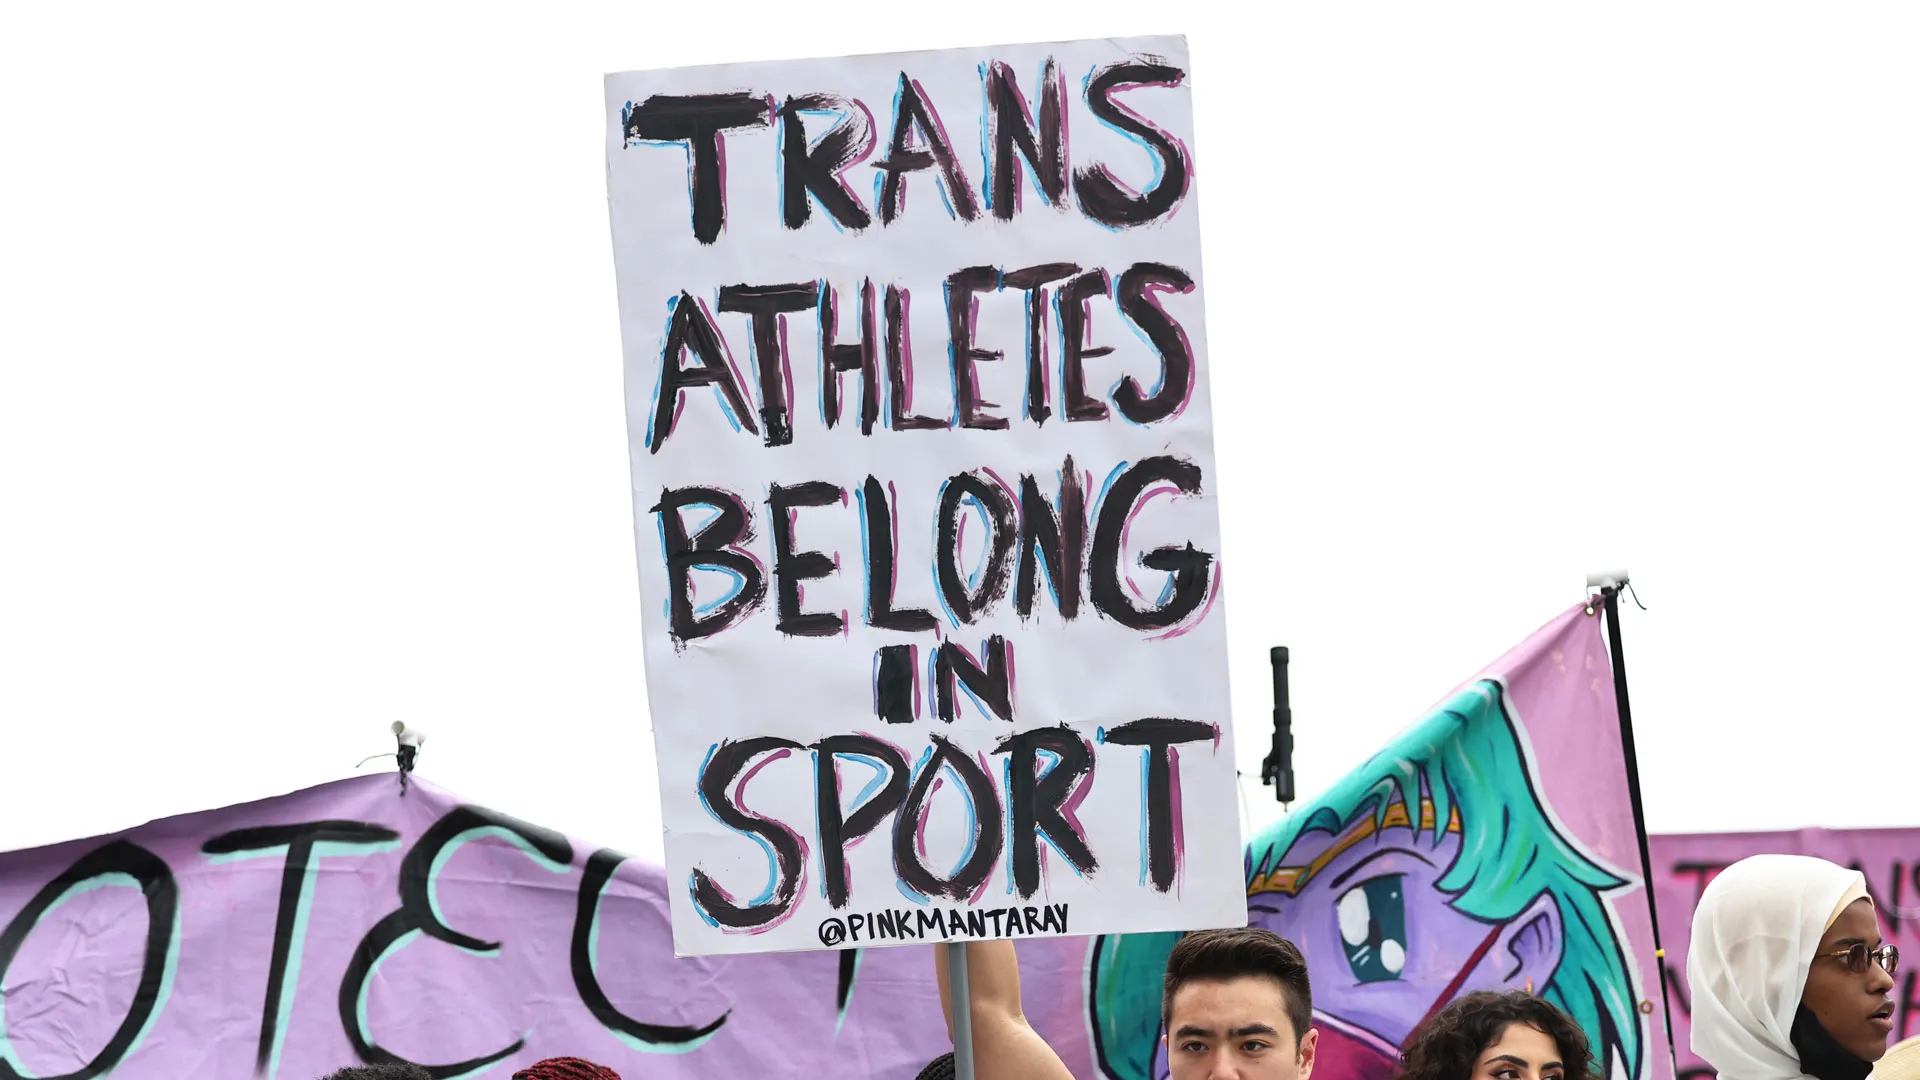 Culture Secretary Lucy Frazer calls for ban on trans athletes competing in female-only events